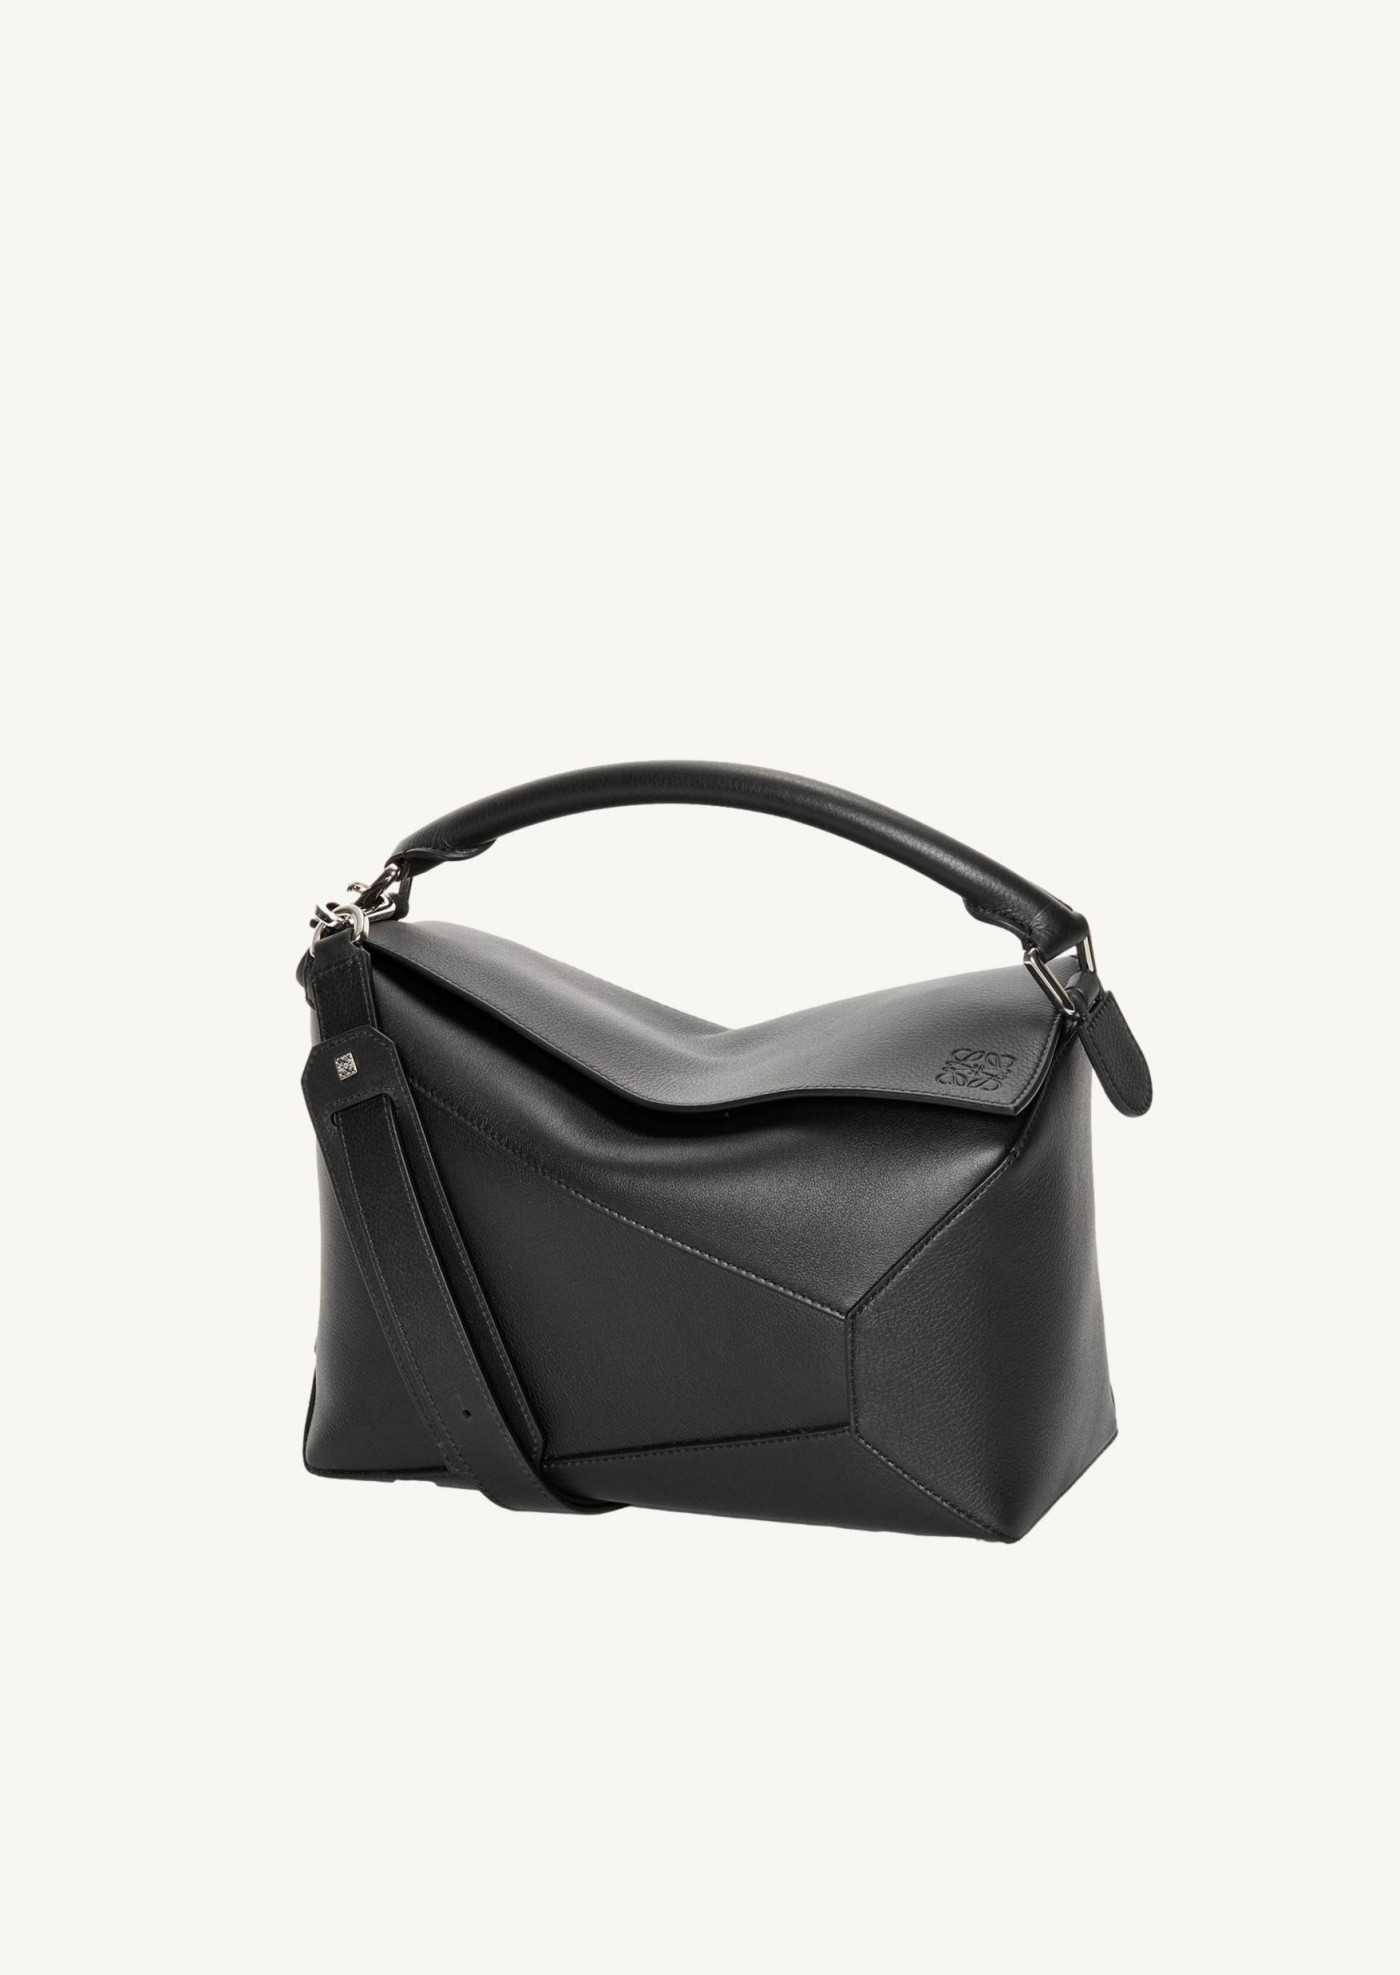 LOEWE PUZZLE BAGS: SMALL OR MINI? 